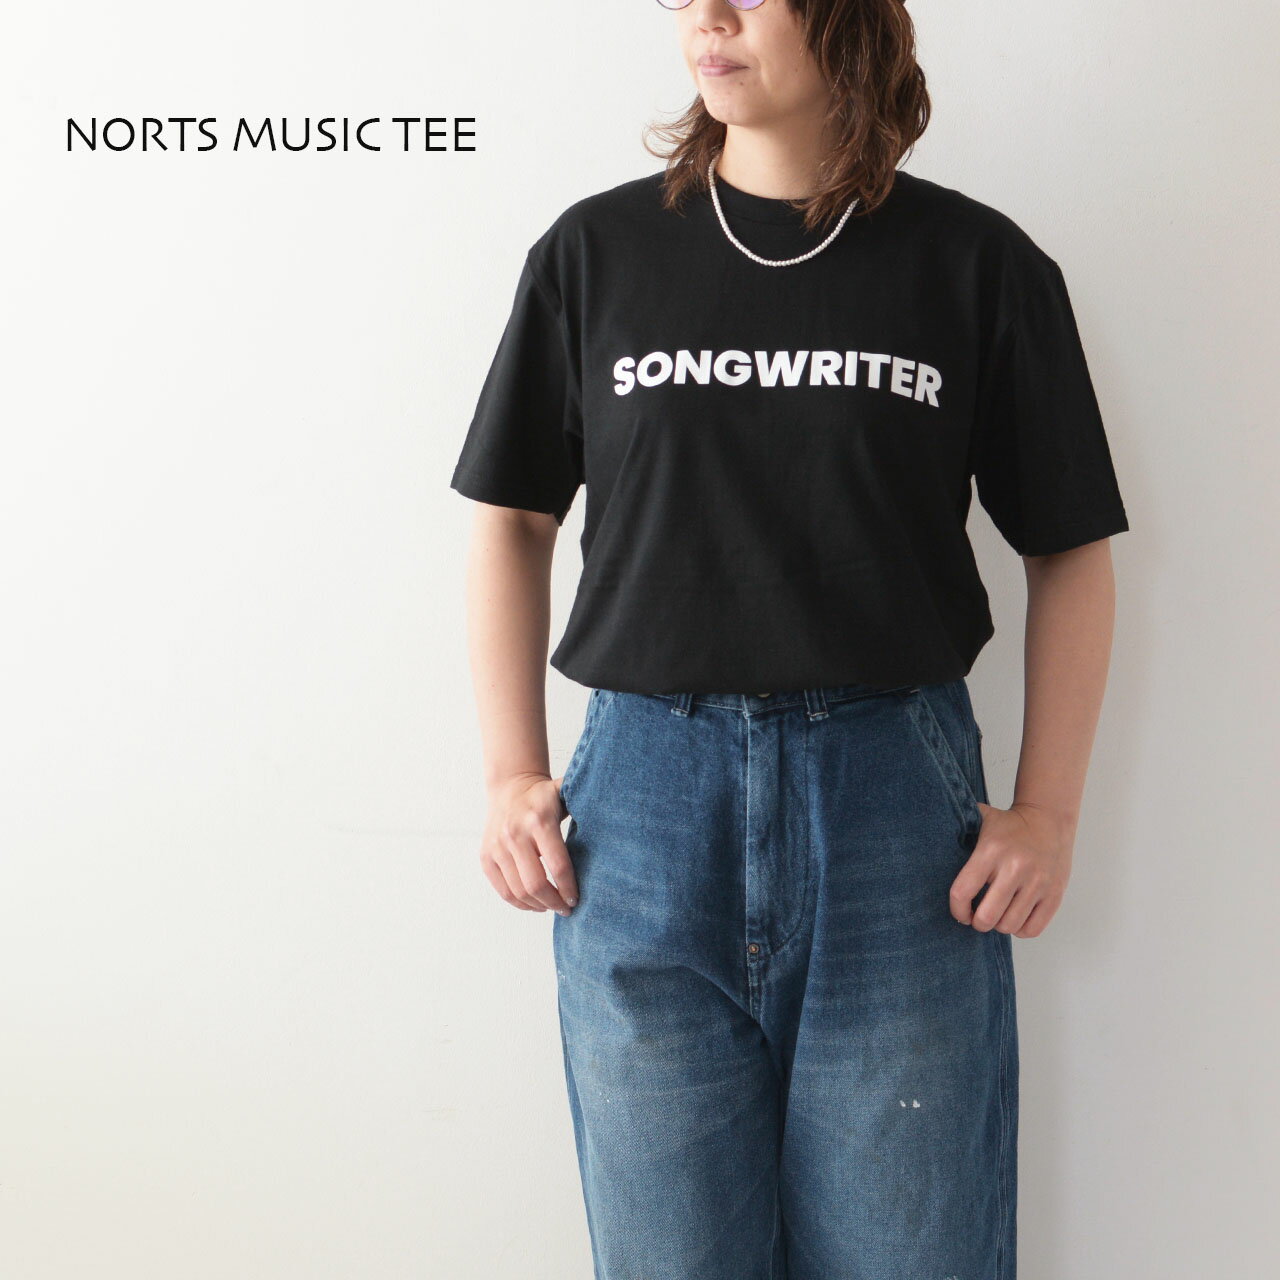 NORTS MUSIC TEE  PRINT TEE MUSIC -Songwriter- (As Worn By Thom Yorke, Radiohead)  プリント ミュージック Tシャツ ソングライター・半袖・バンドT・MEN'S/LADY'S 